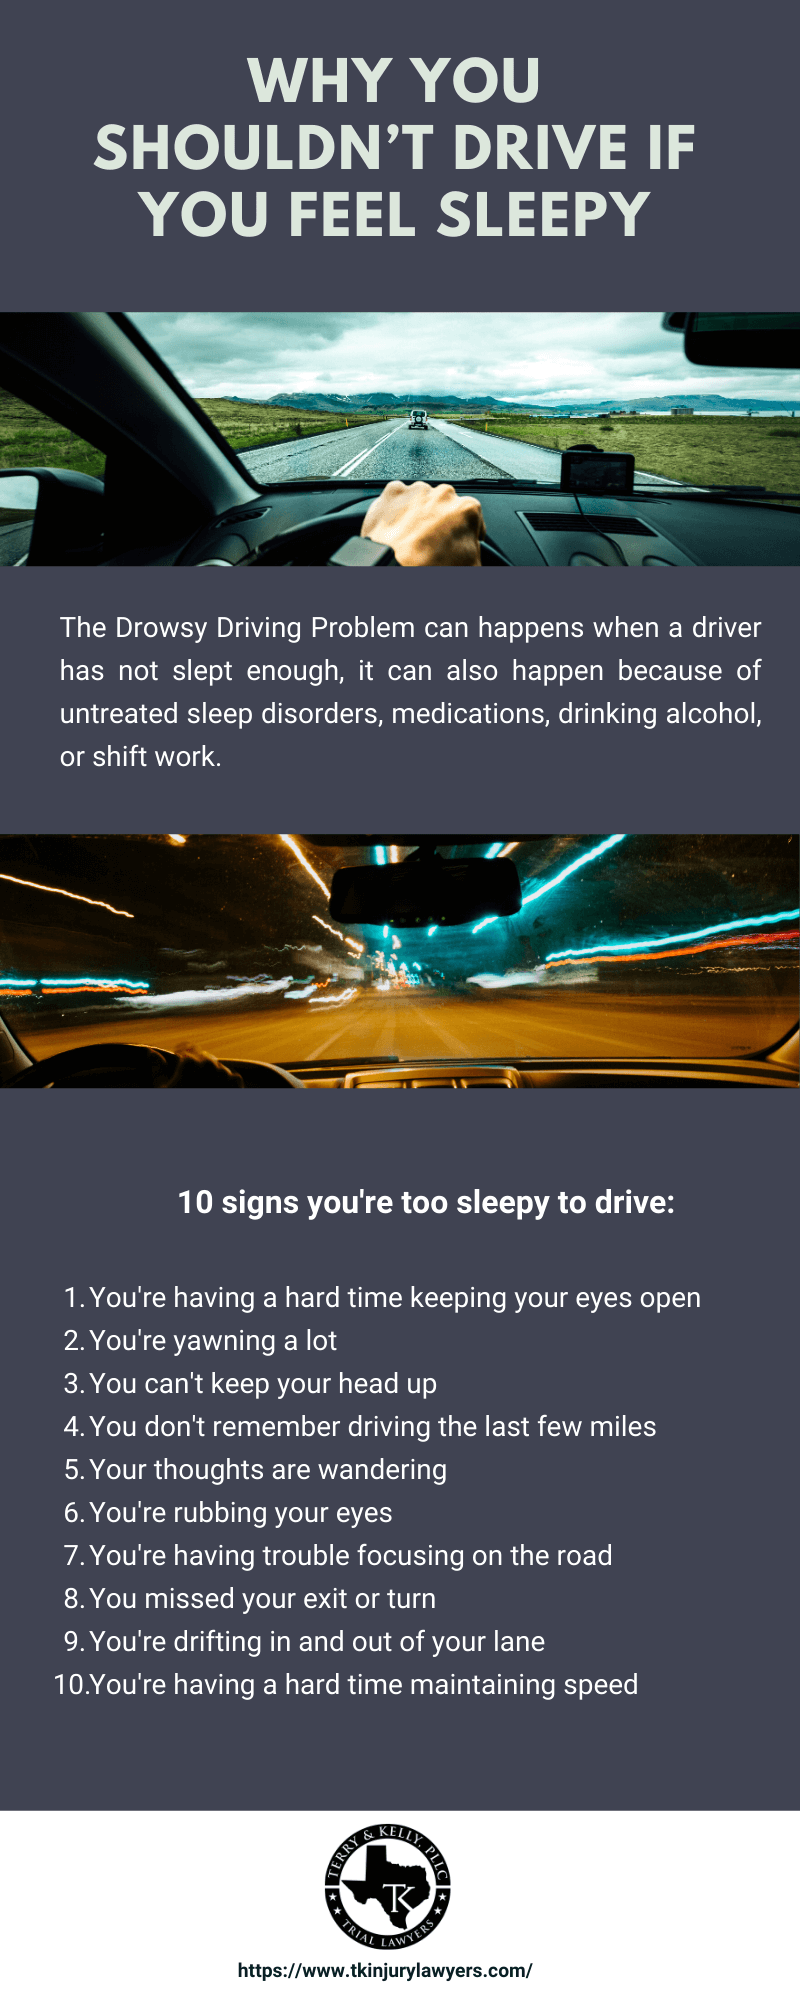 The Drowsy Driving Problem